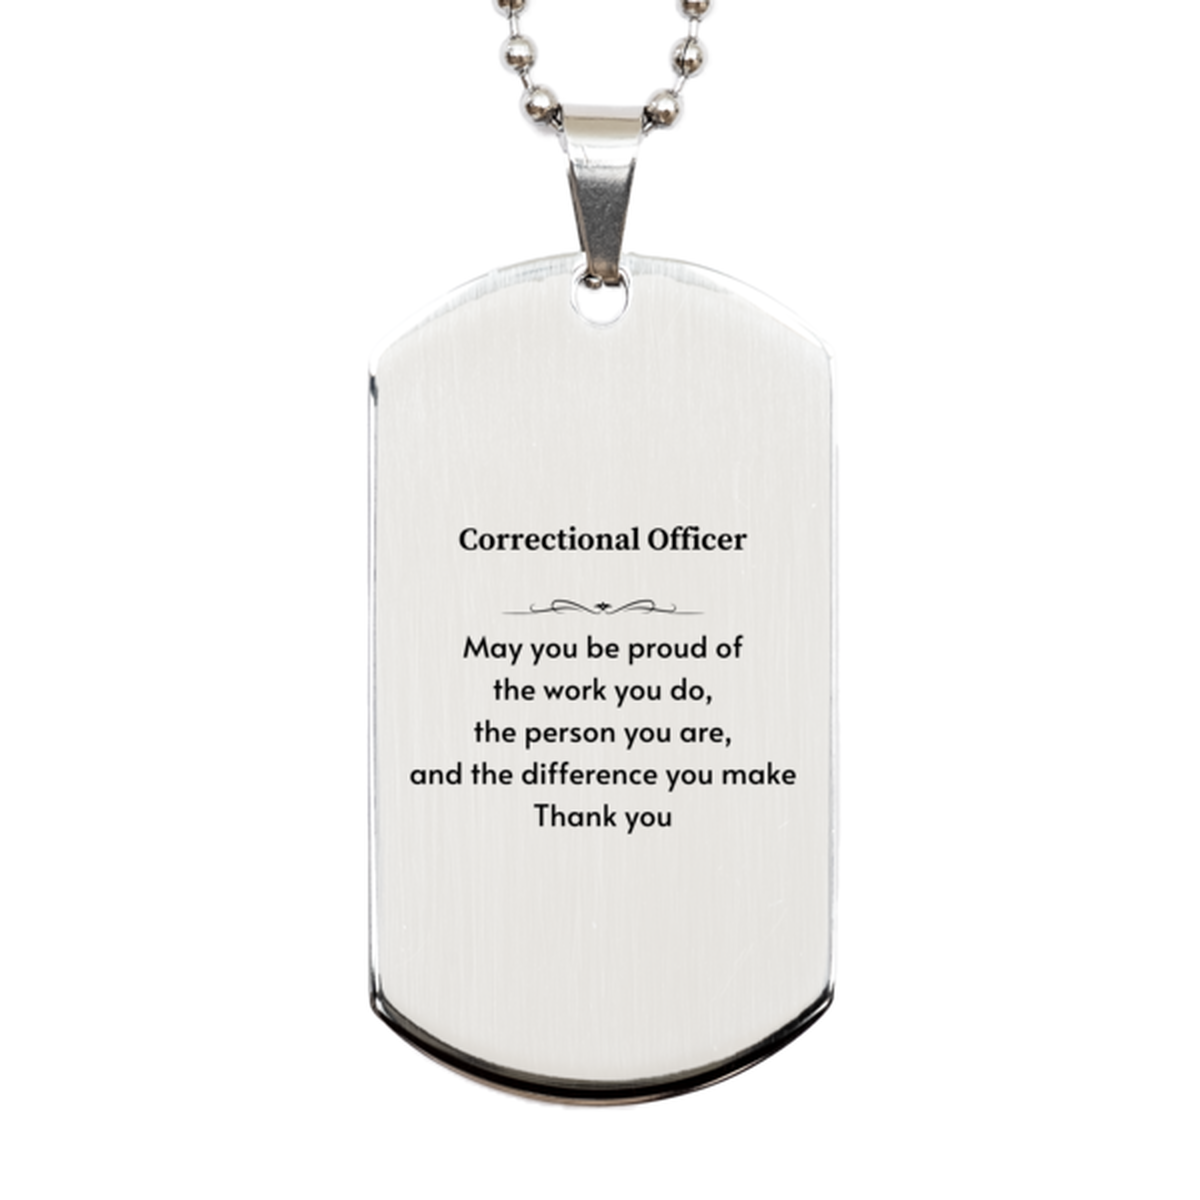 Heartwarming Silver Dog Tag Retirement Coworkers Gifts for Correctional Officer, Correctional Officer May You be proud of the work you do, the person you are Gifts for Boss Men Women Friends